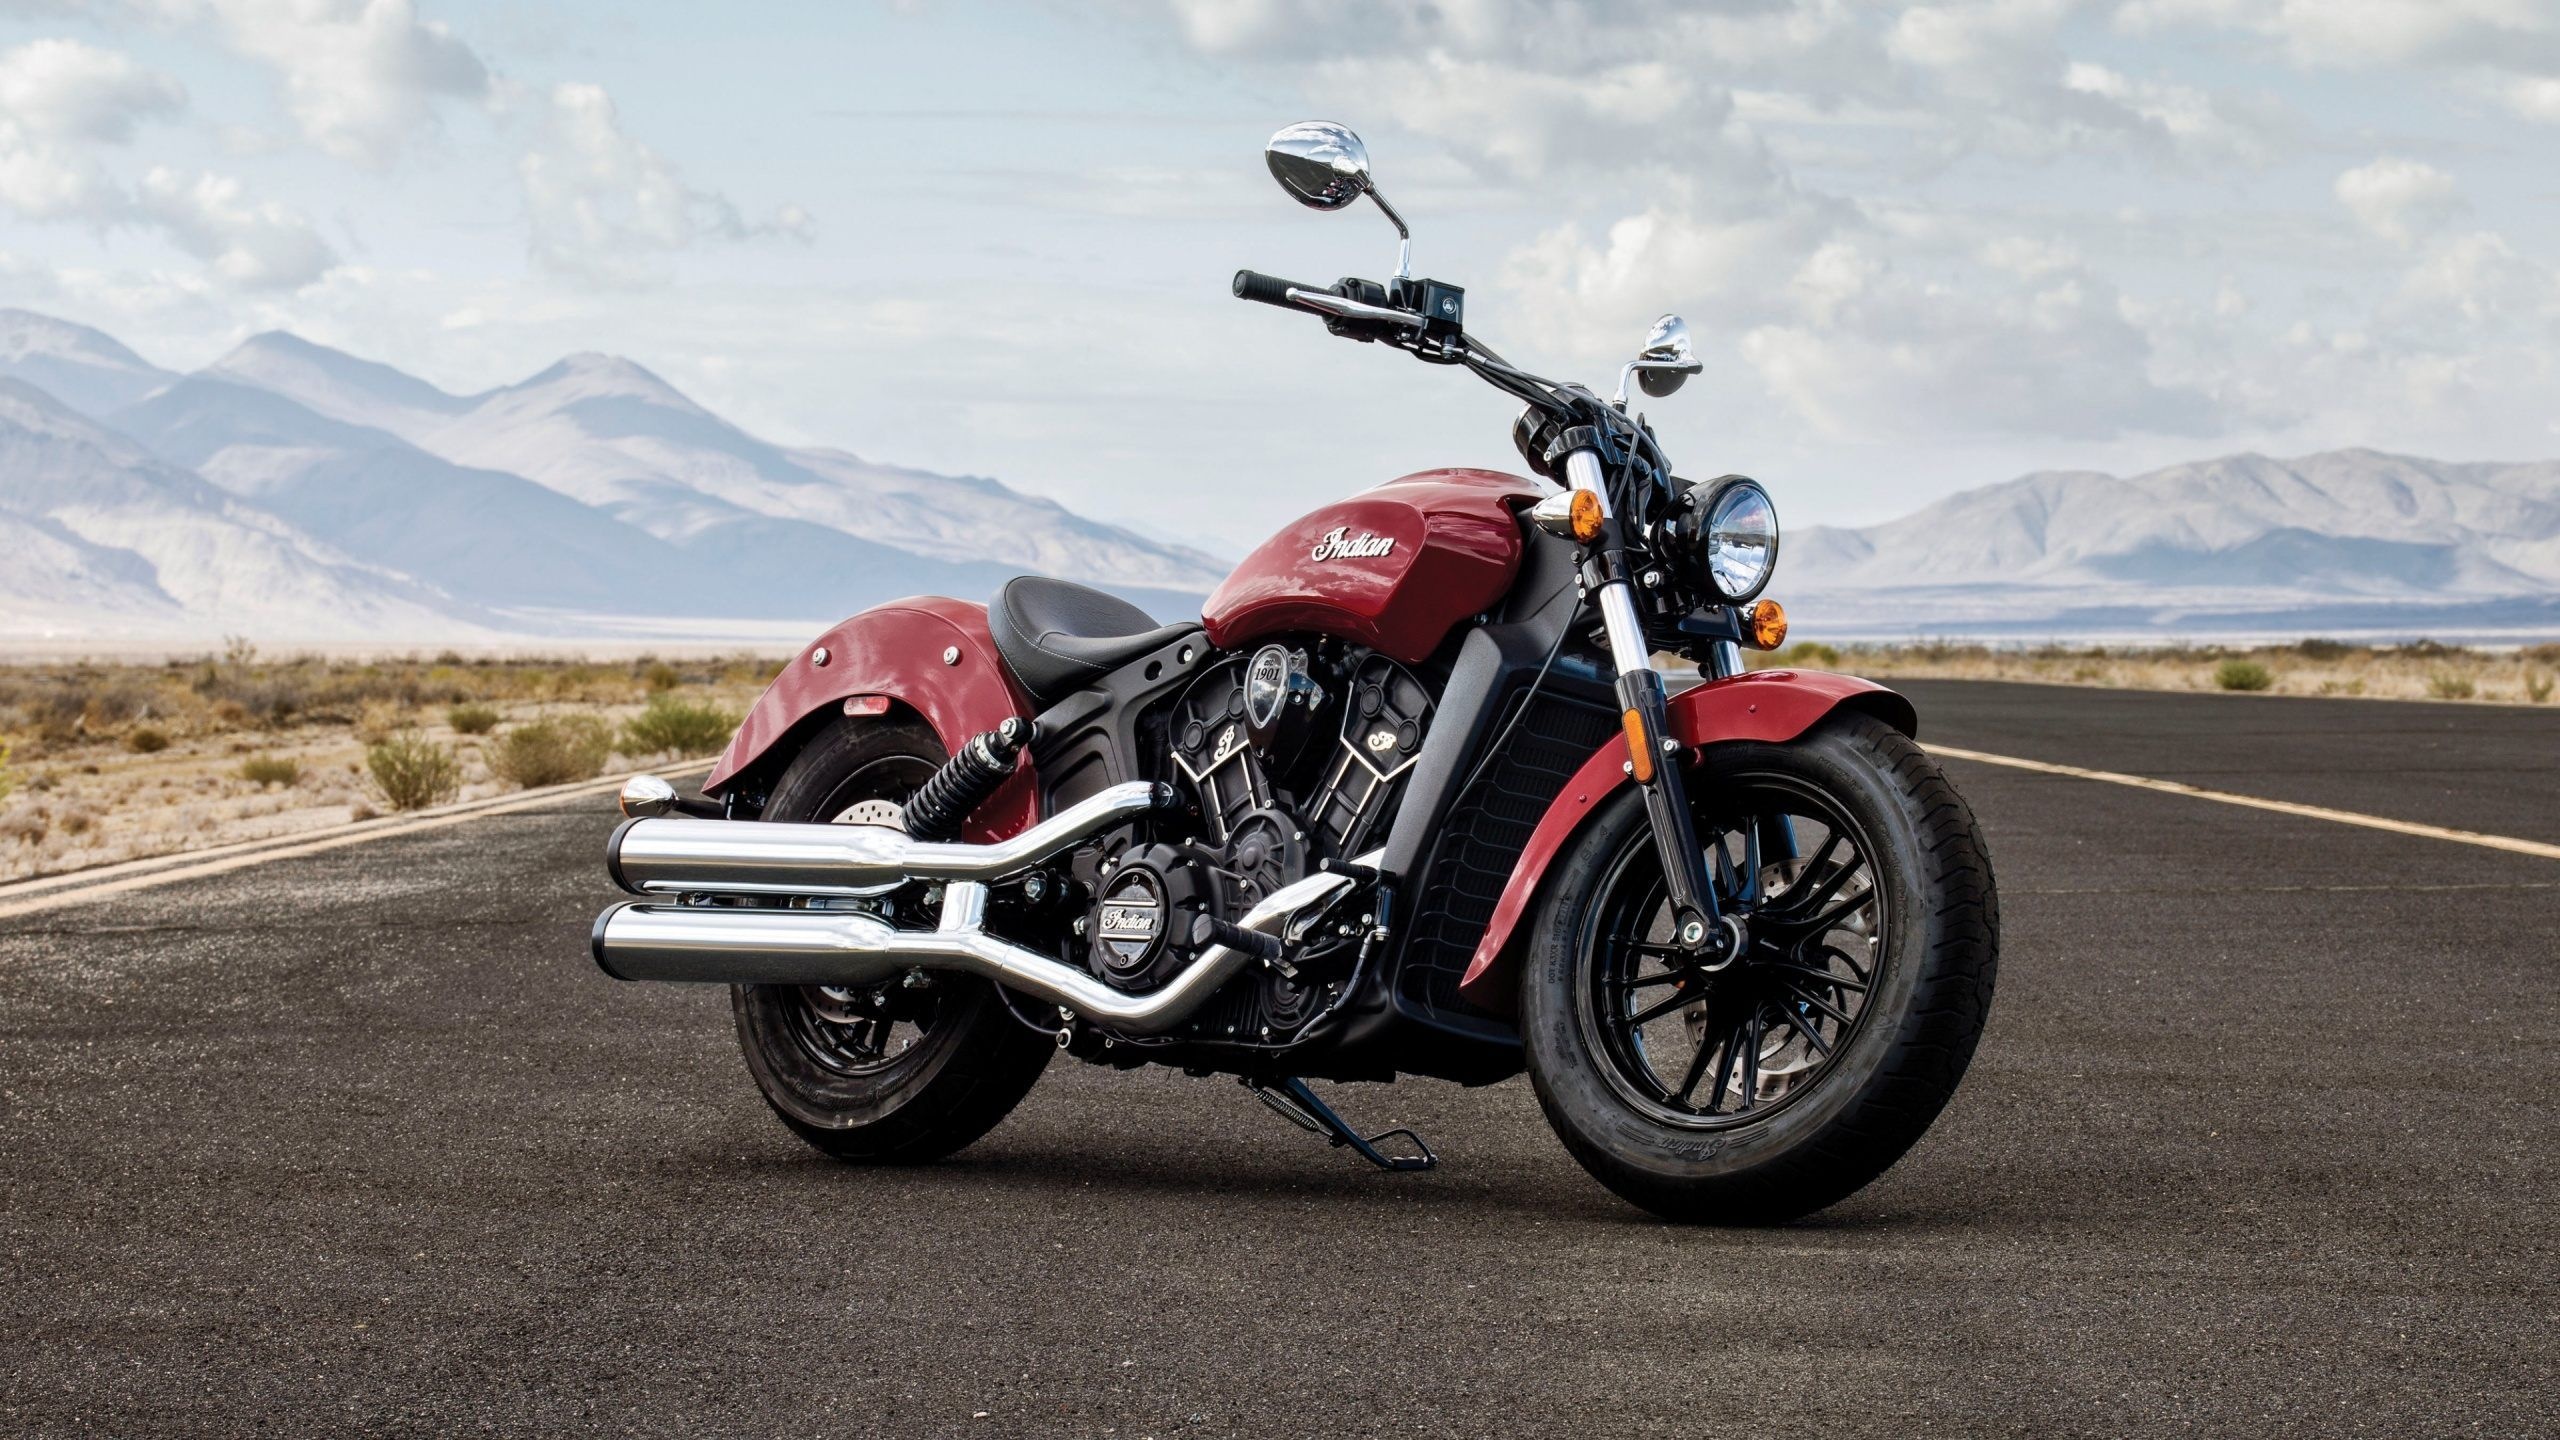 Indian Scout Sixty, Auto industry, Scout Sixty wallpaper, Free download, 2560x1440 HD Desktop